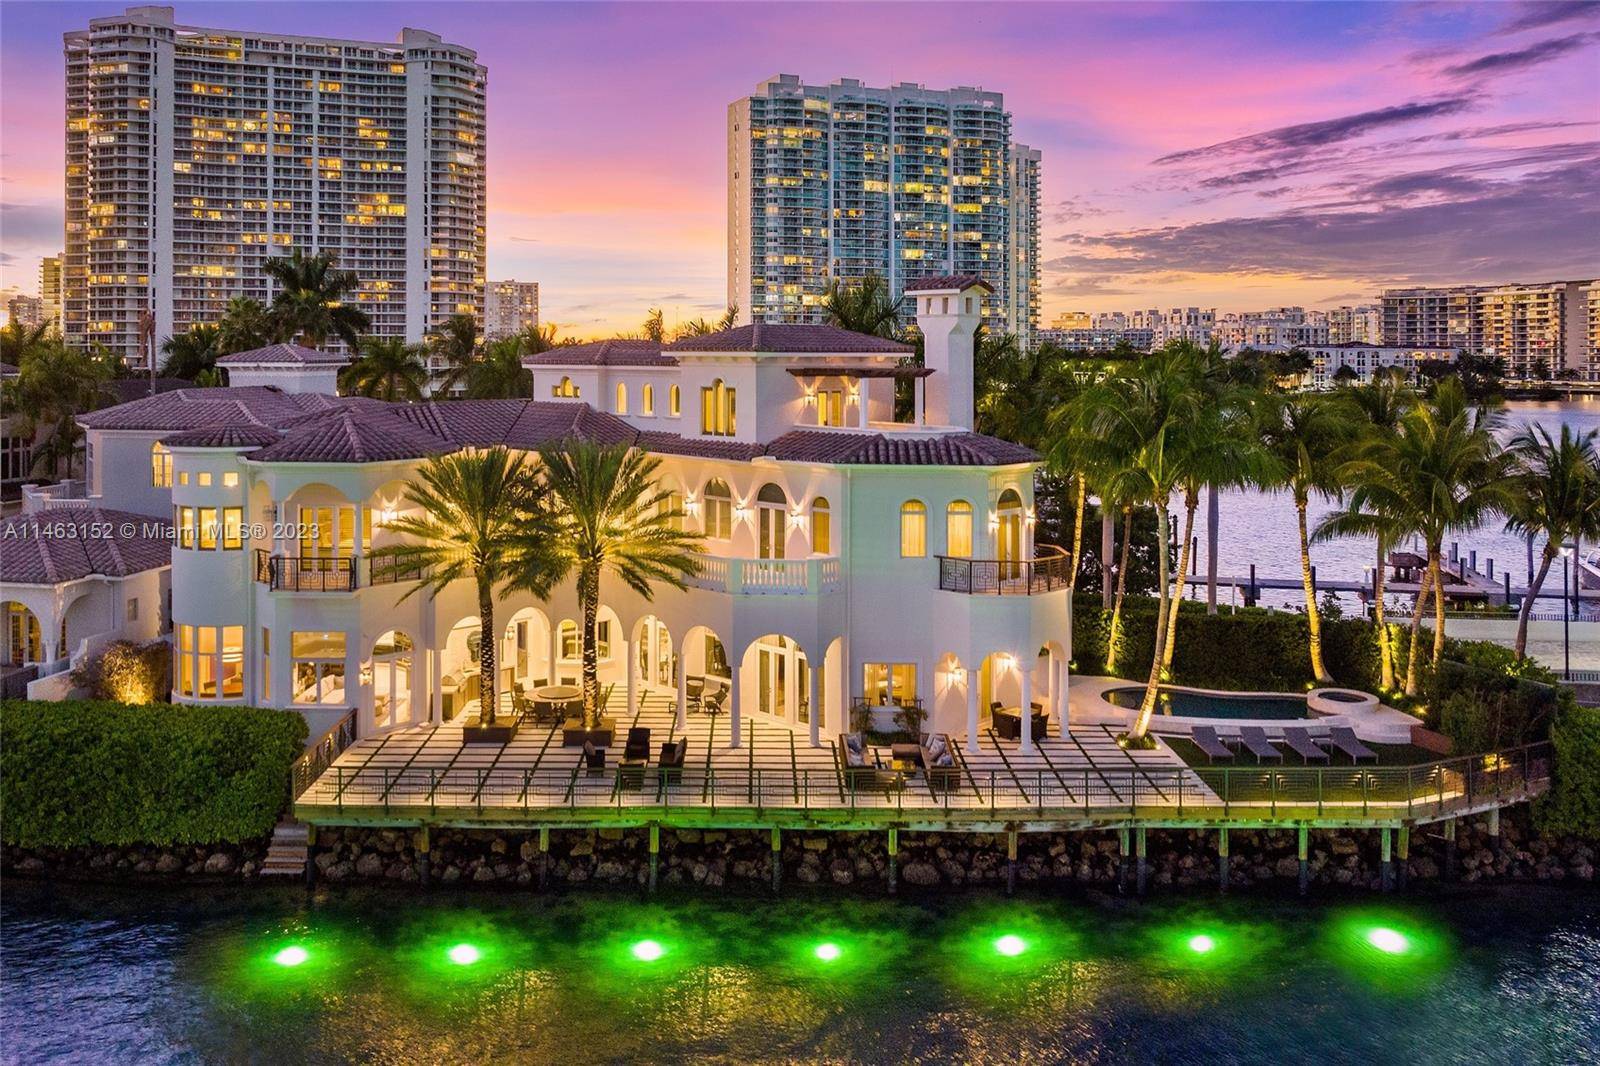 Experience sophisticated island living in this stunning waterfront paradise.